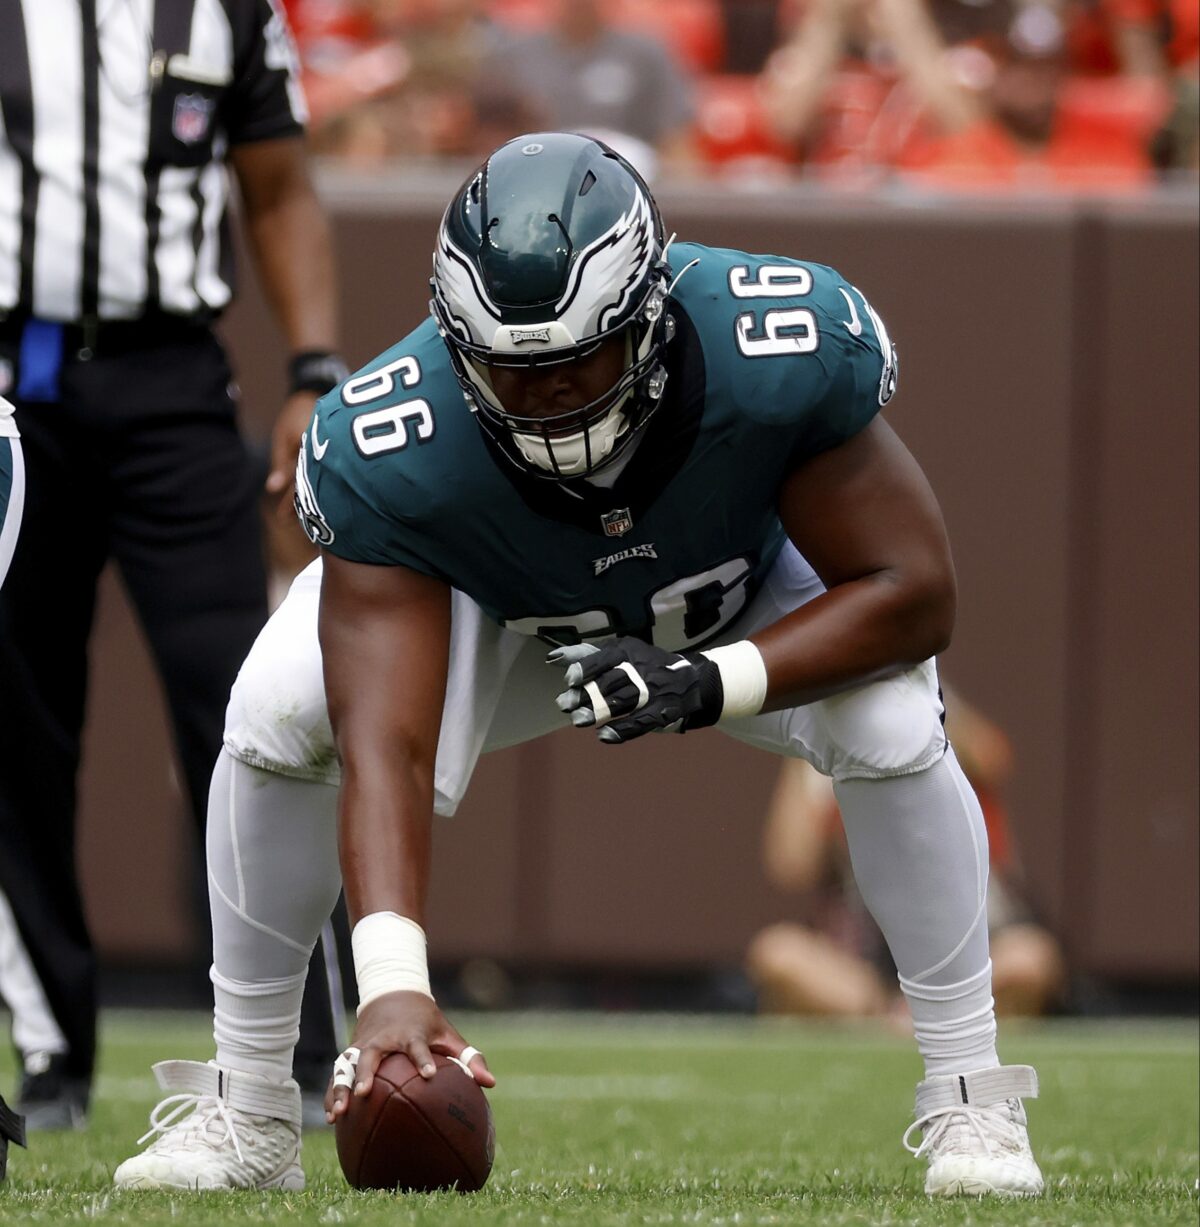 Eagles to release Cameron Tom